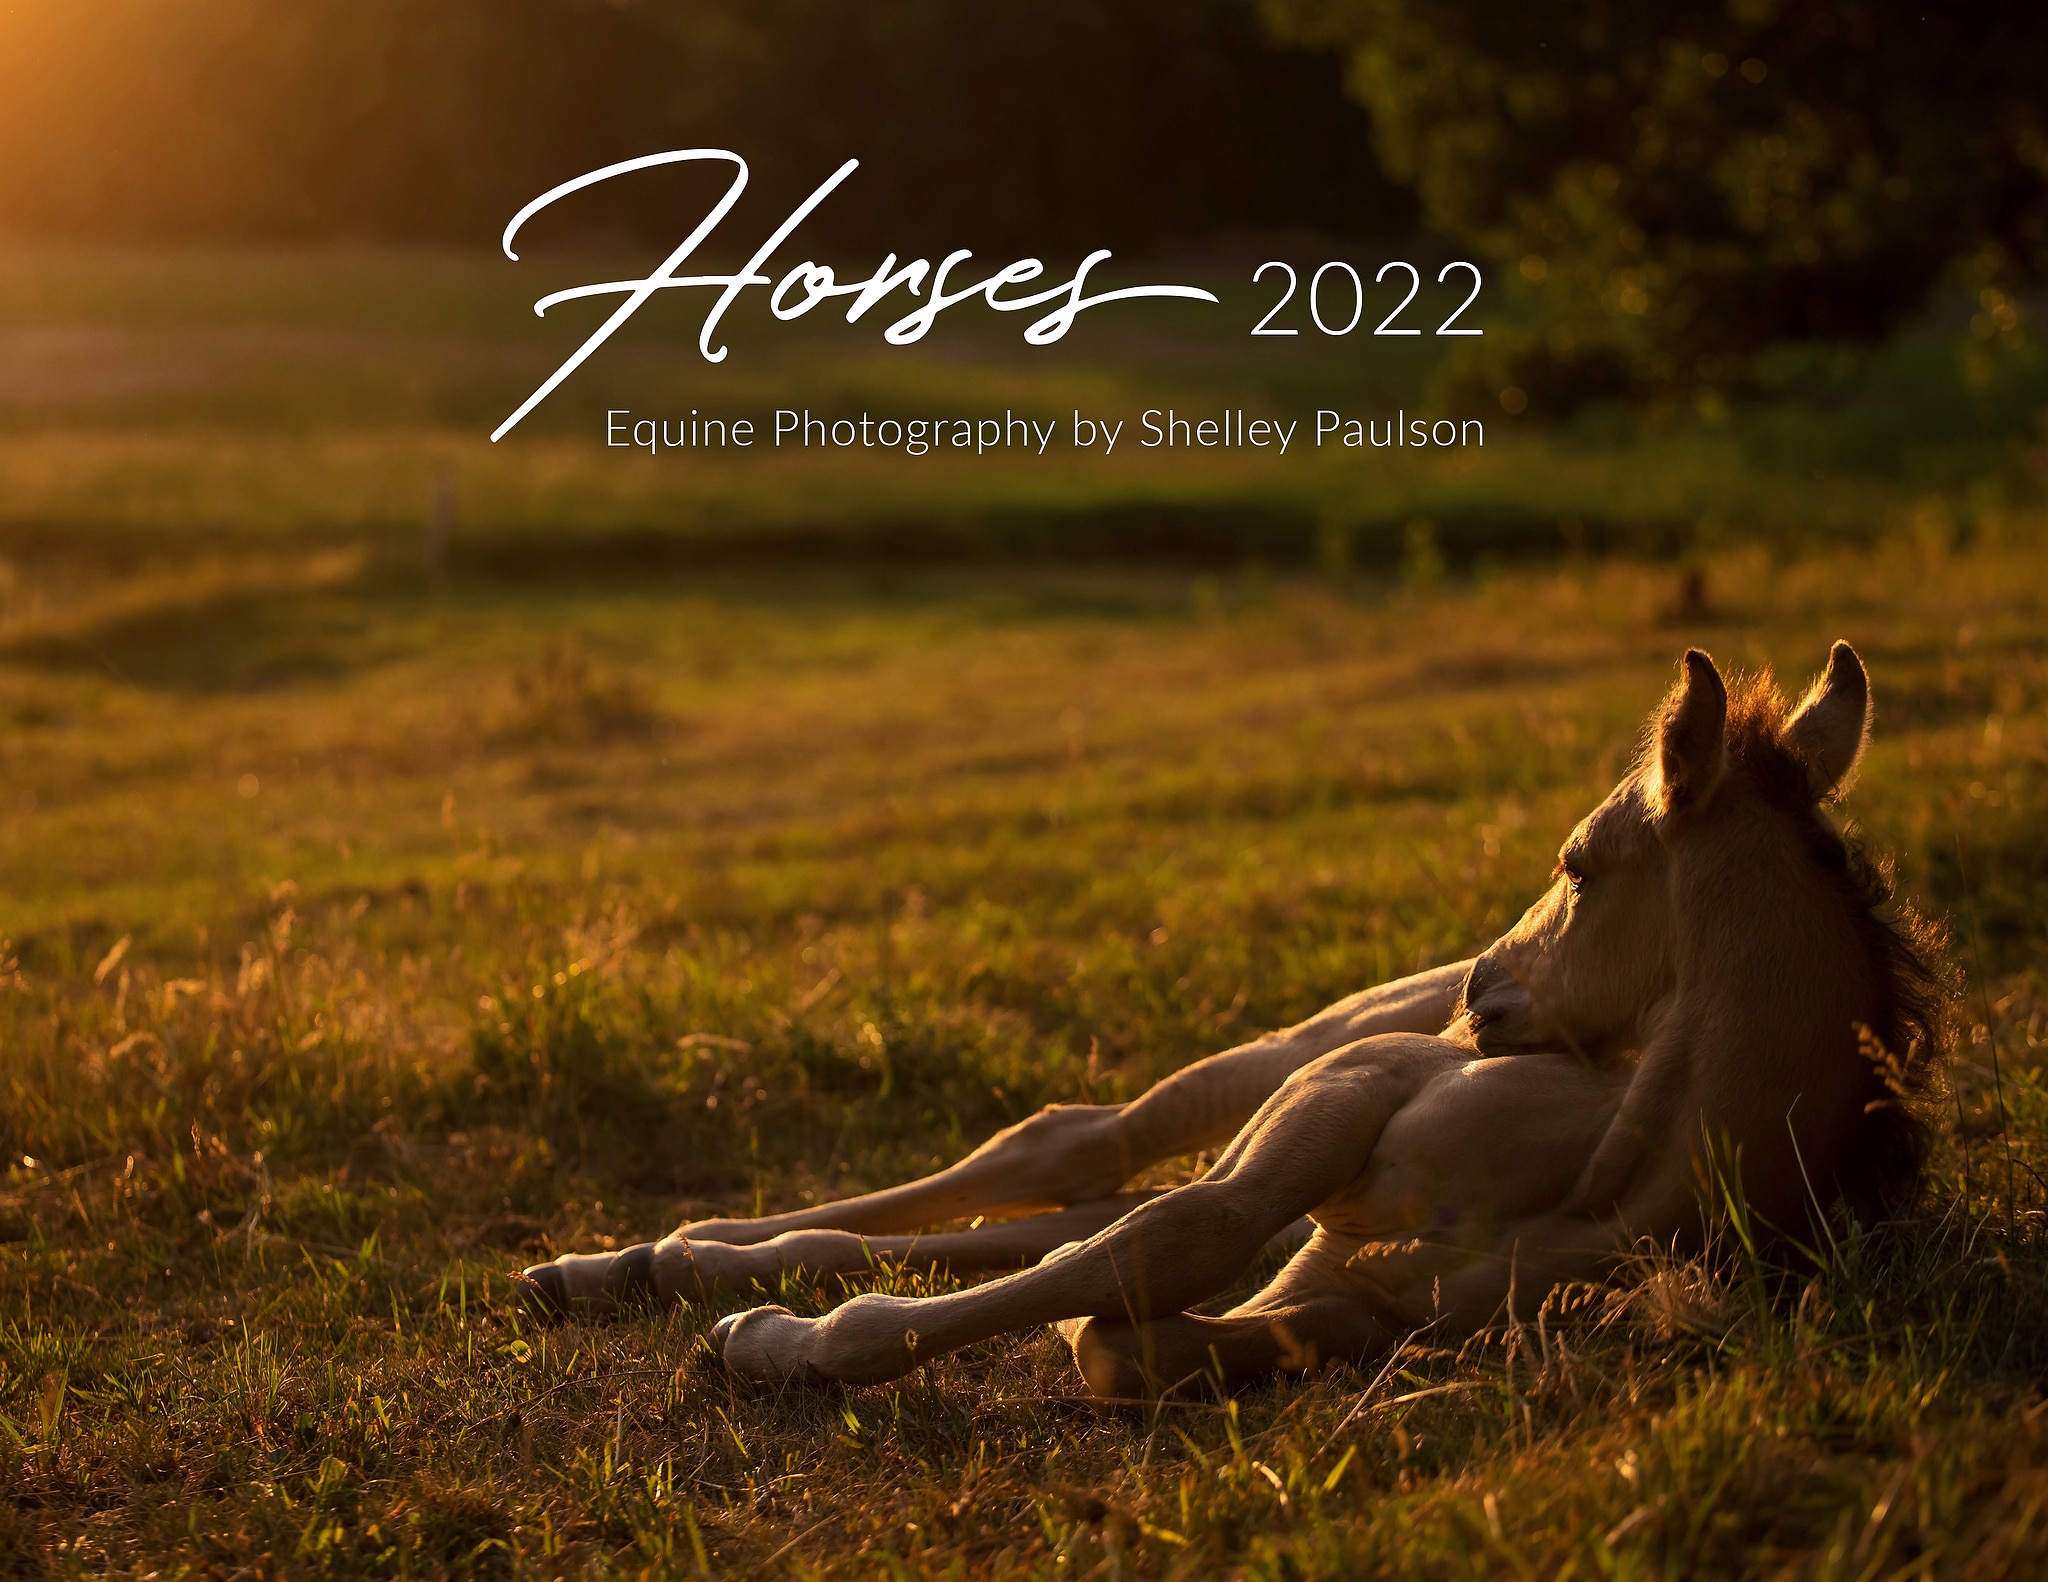 2022 Shelley Paulson “Horses” Calendar is Available for Pre-Order!